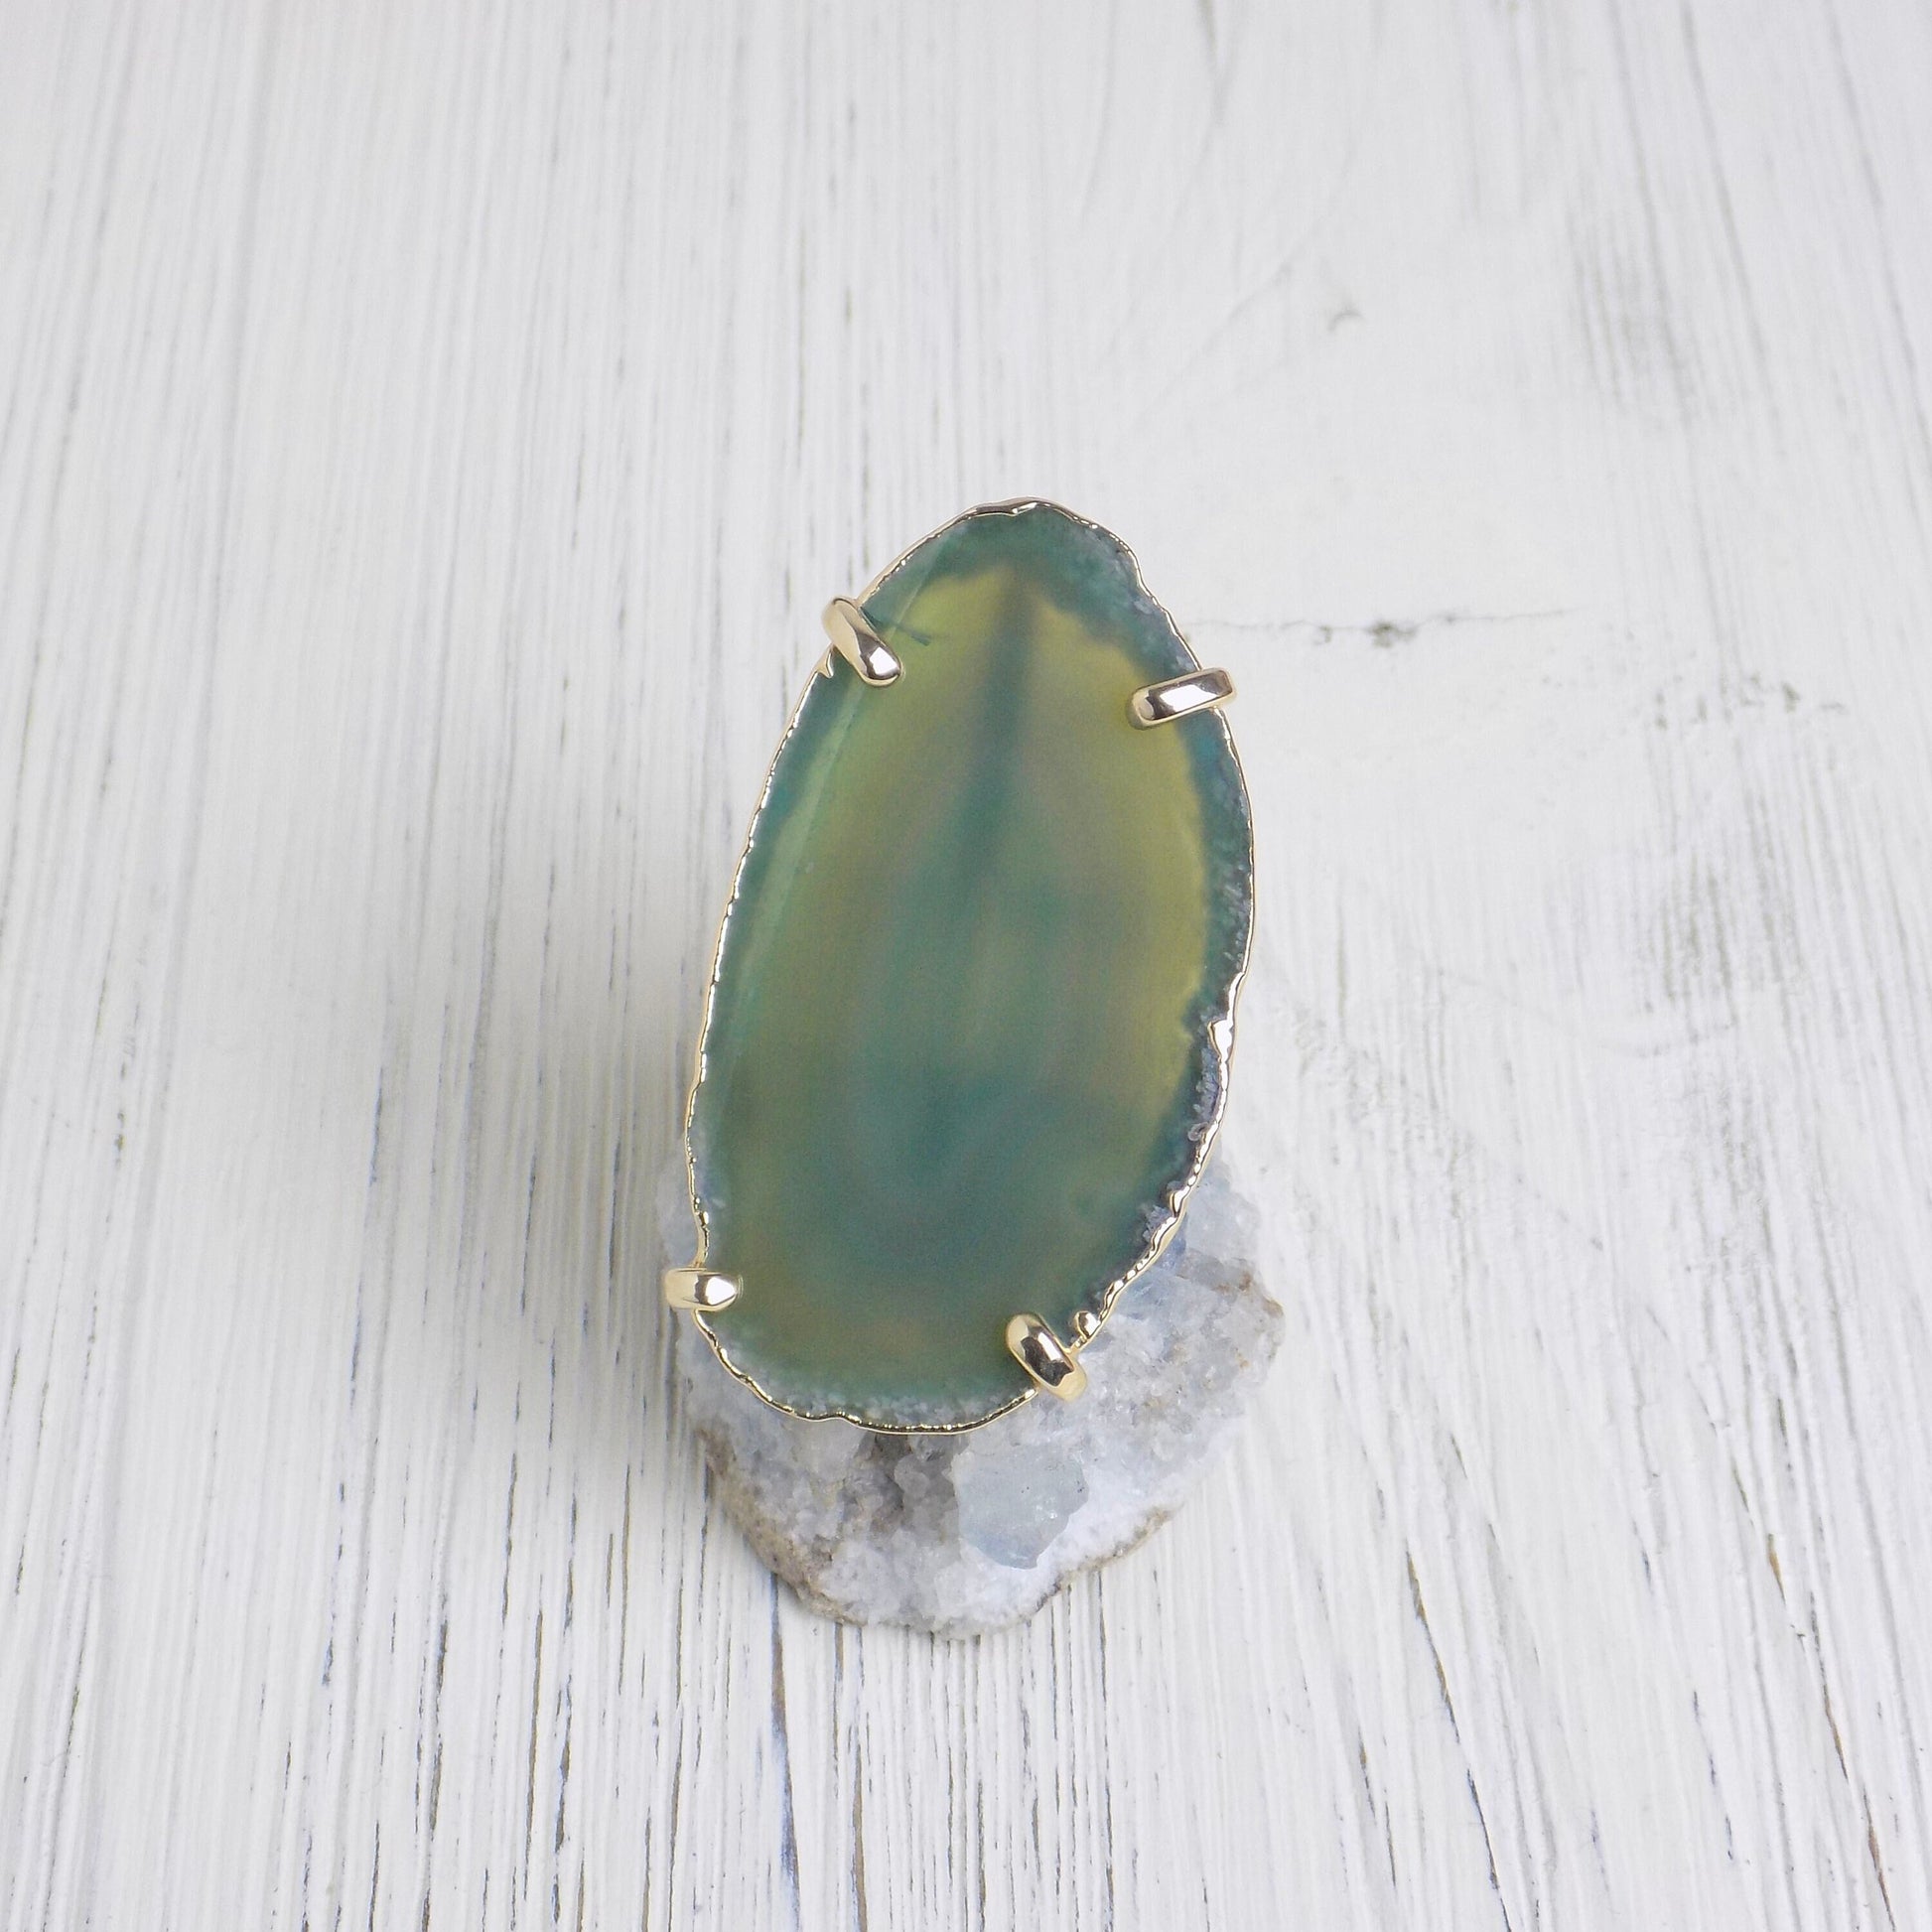 Green Agate Ring Gold, Statement Sliced Geode Ring, Boho Stone Ring Adjustable, Wedding Jewelry, G14-216